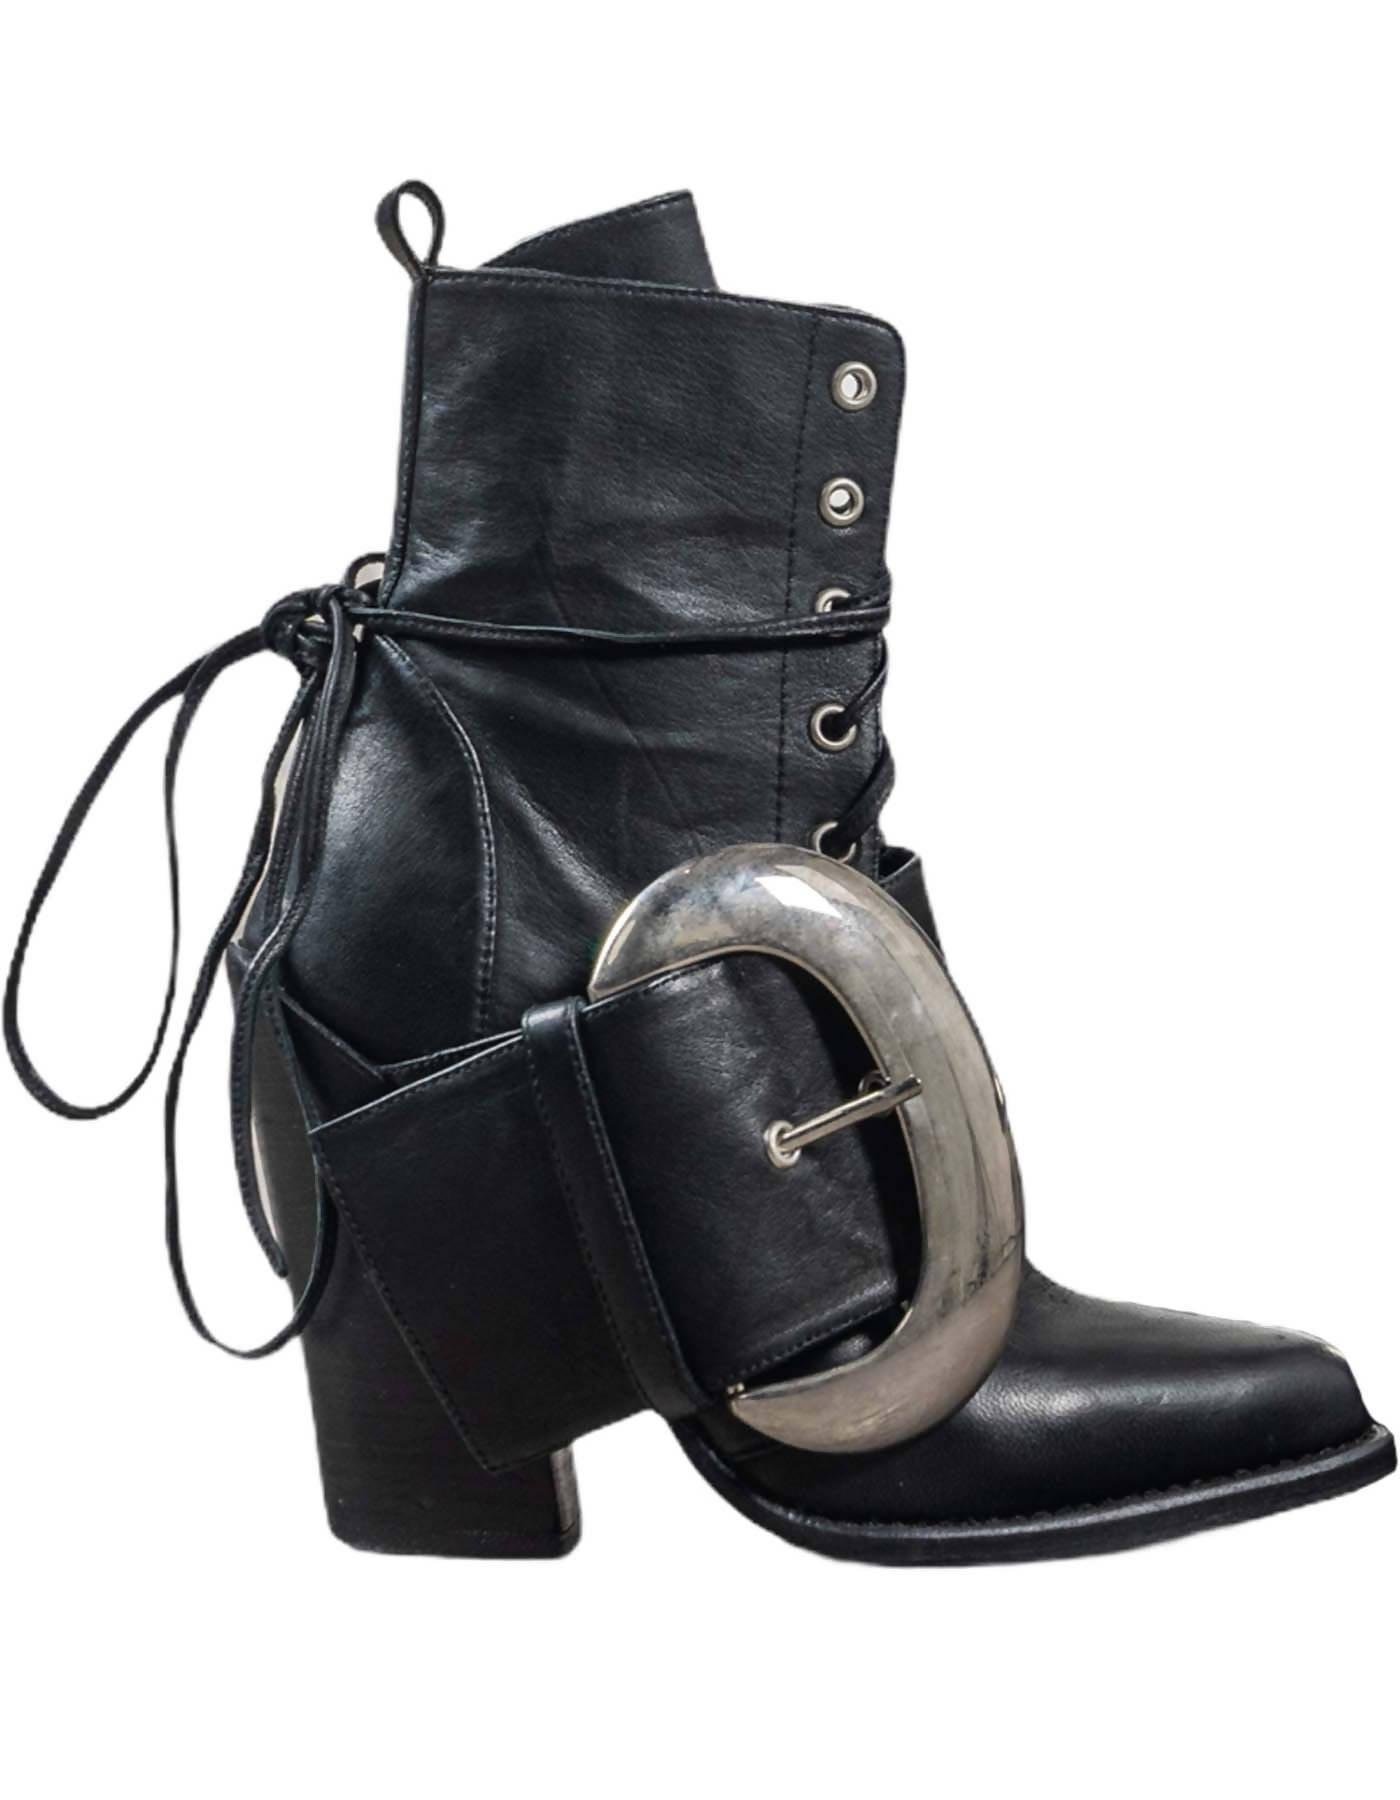 Sotadic Boots by MARK BAIGENT